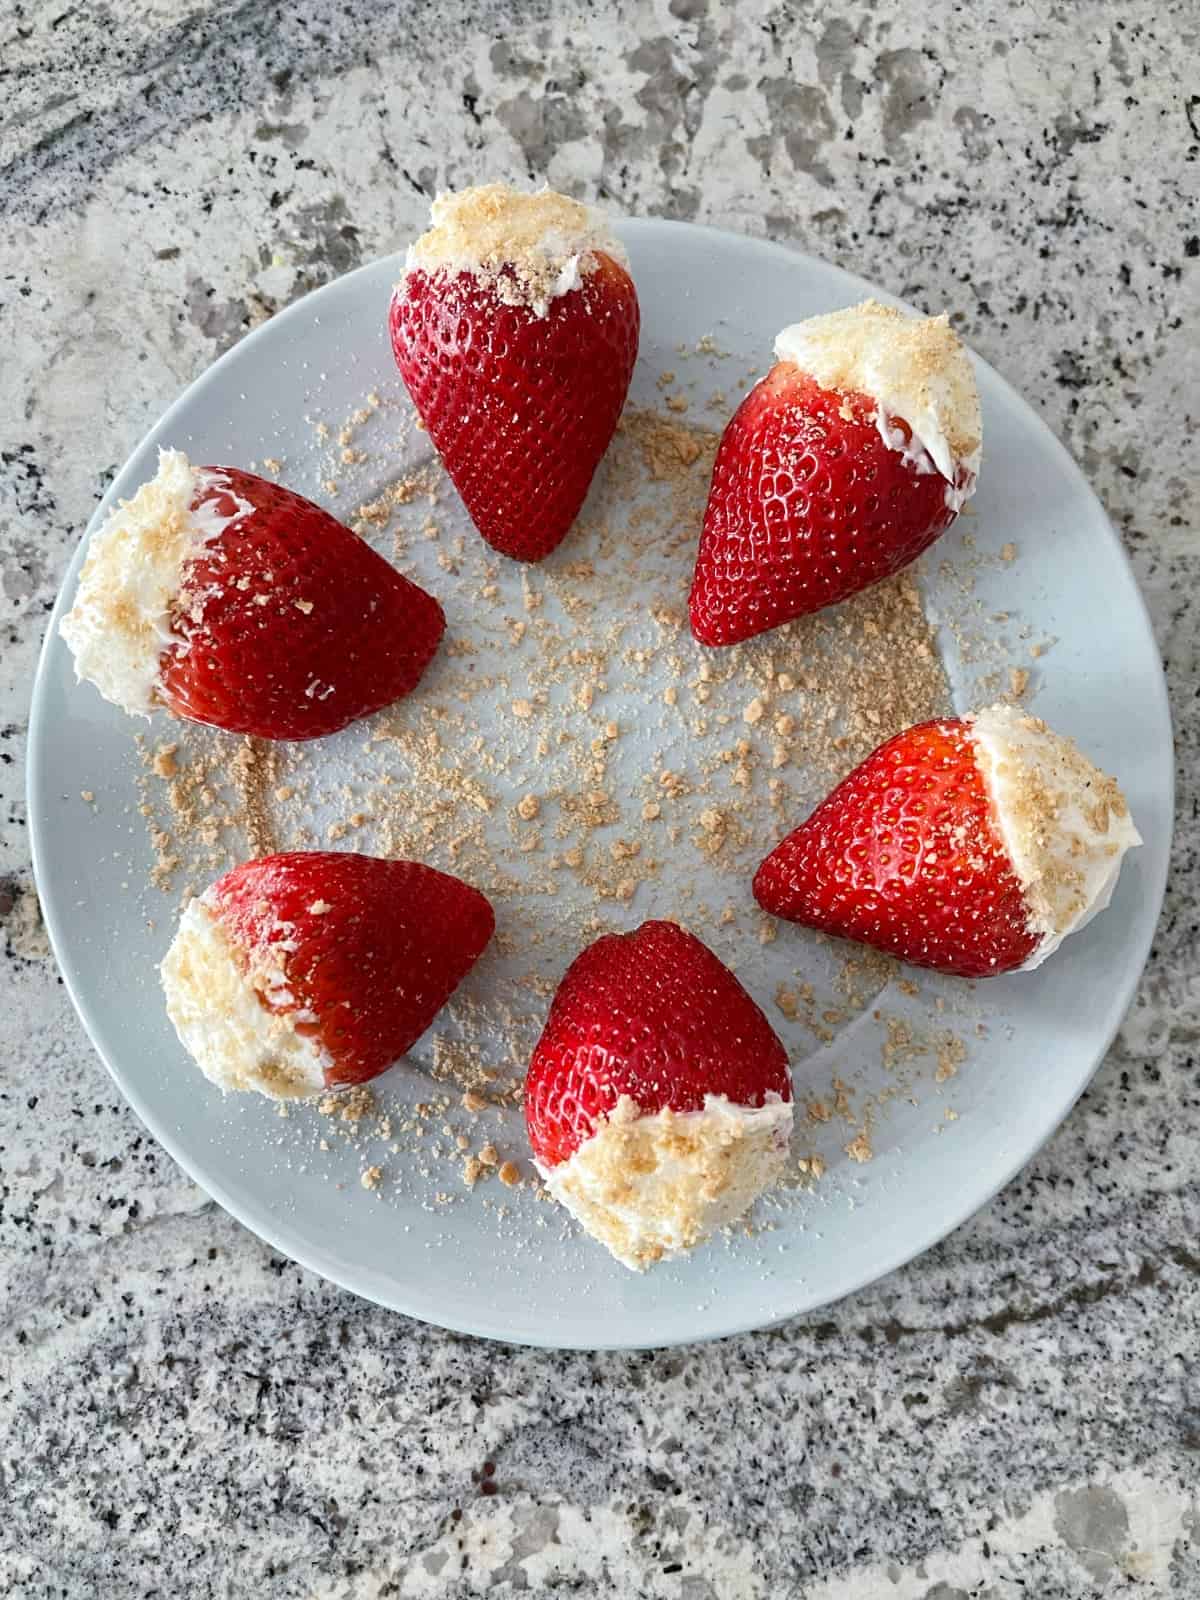 Cheesecake filled with strawberries and topped with graham cracker crumbs on a round serving plate.